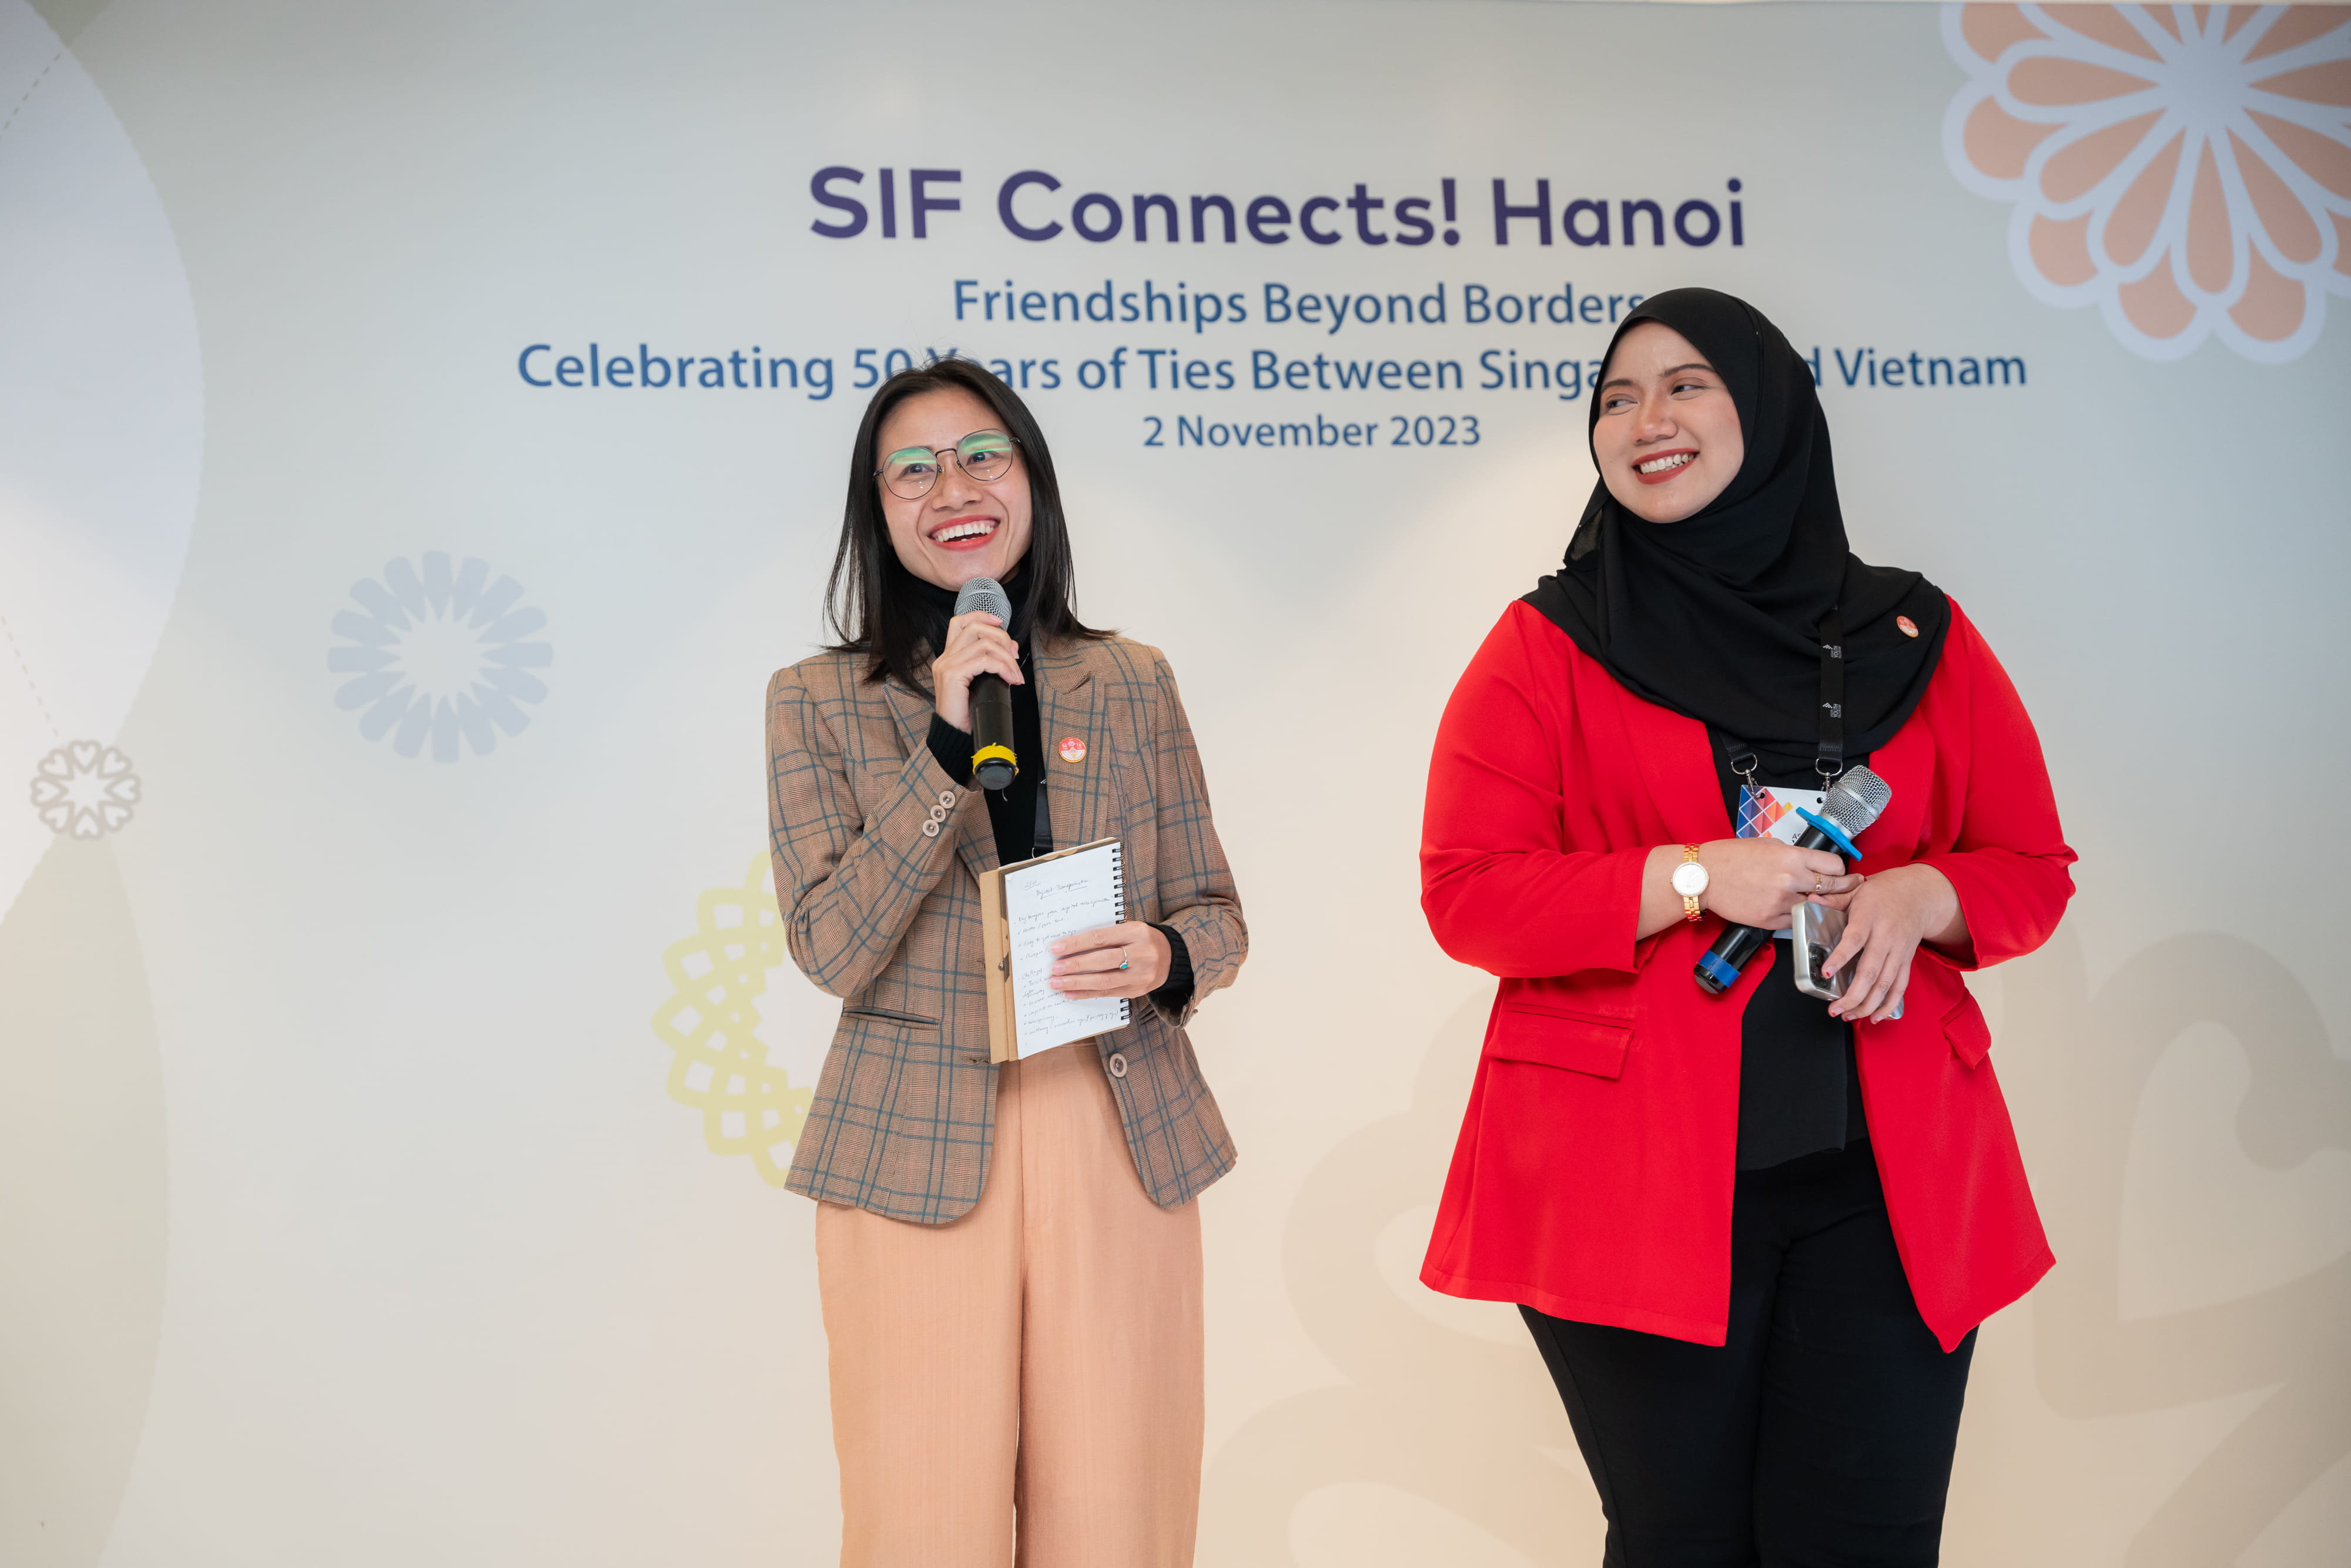 2 Fellows sharing their AYF experience at SIF Connects! Hanoi